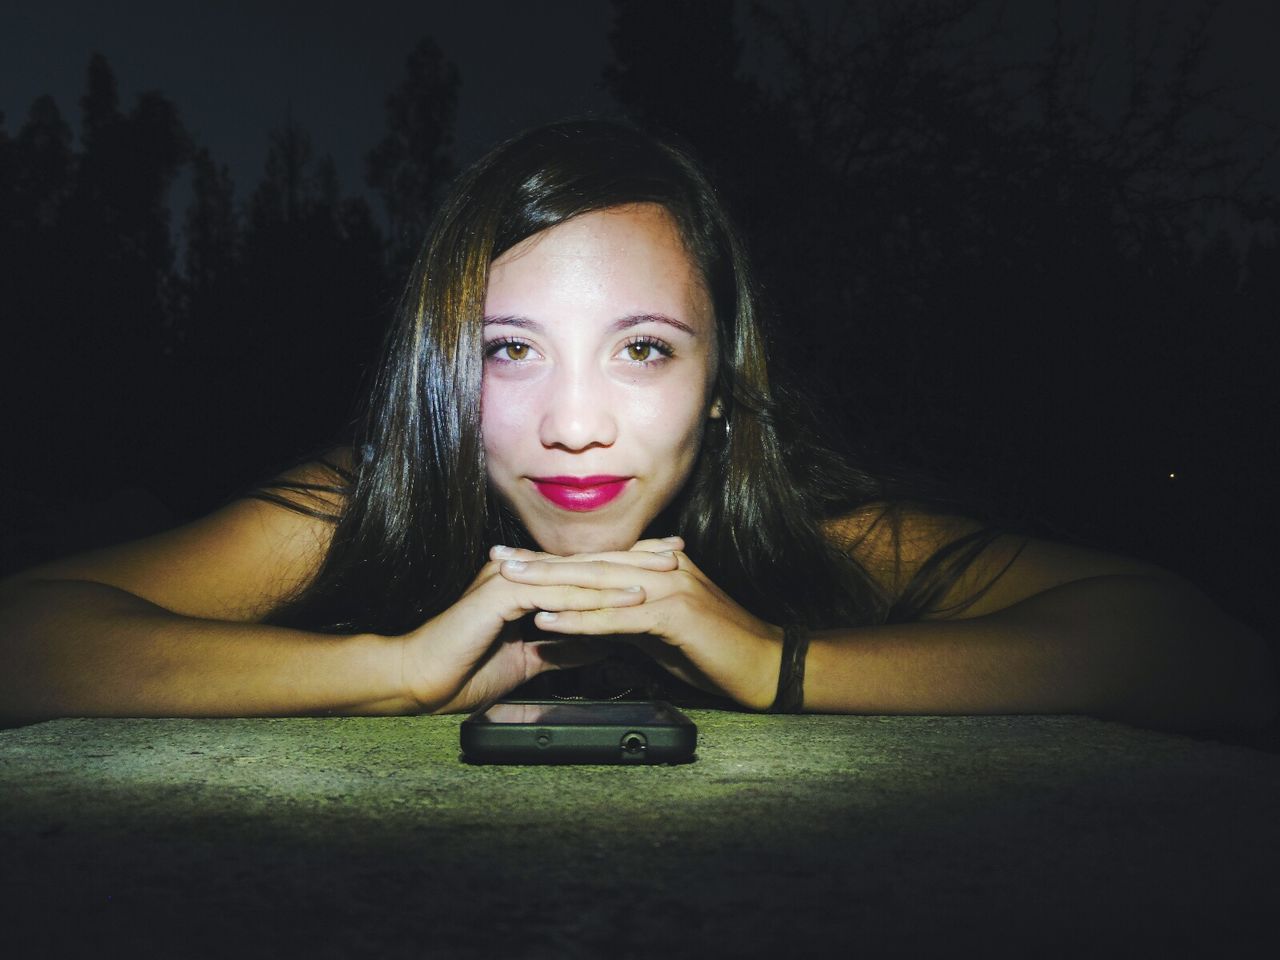 YOUNG WOMAN USING SMART PHONE IN THE DARK